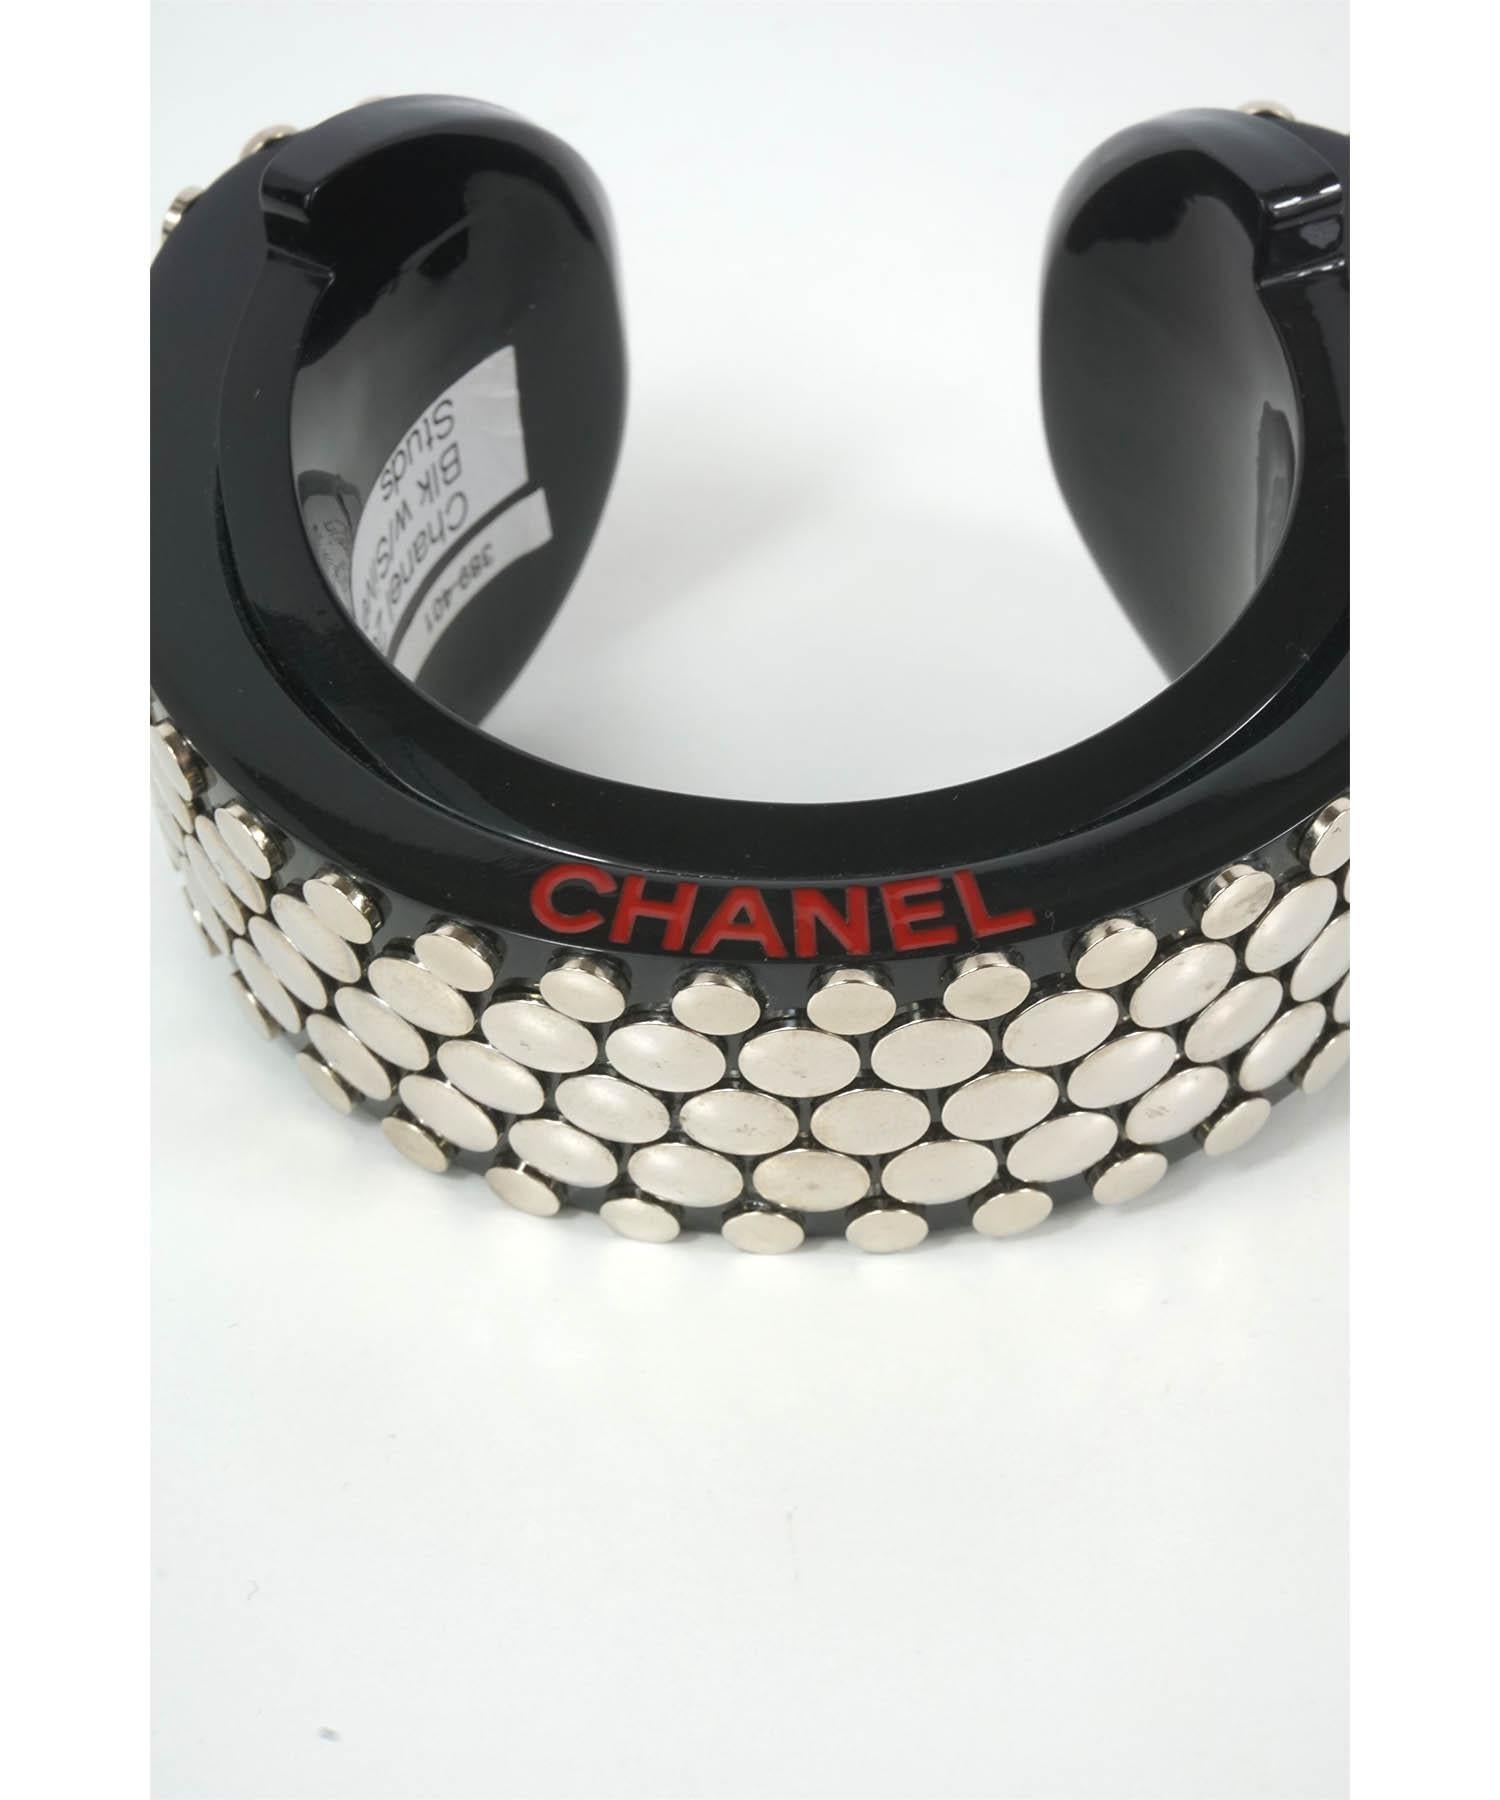 Chanel Black Lucite Cuff Bracelet Embellished with Silver Metal Studs 2005 In Excellent Condition For Sale In Carmel, CA